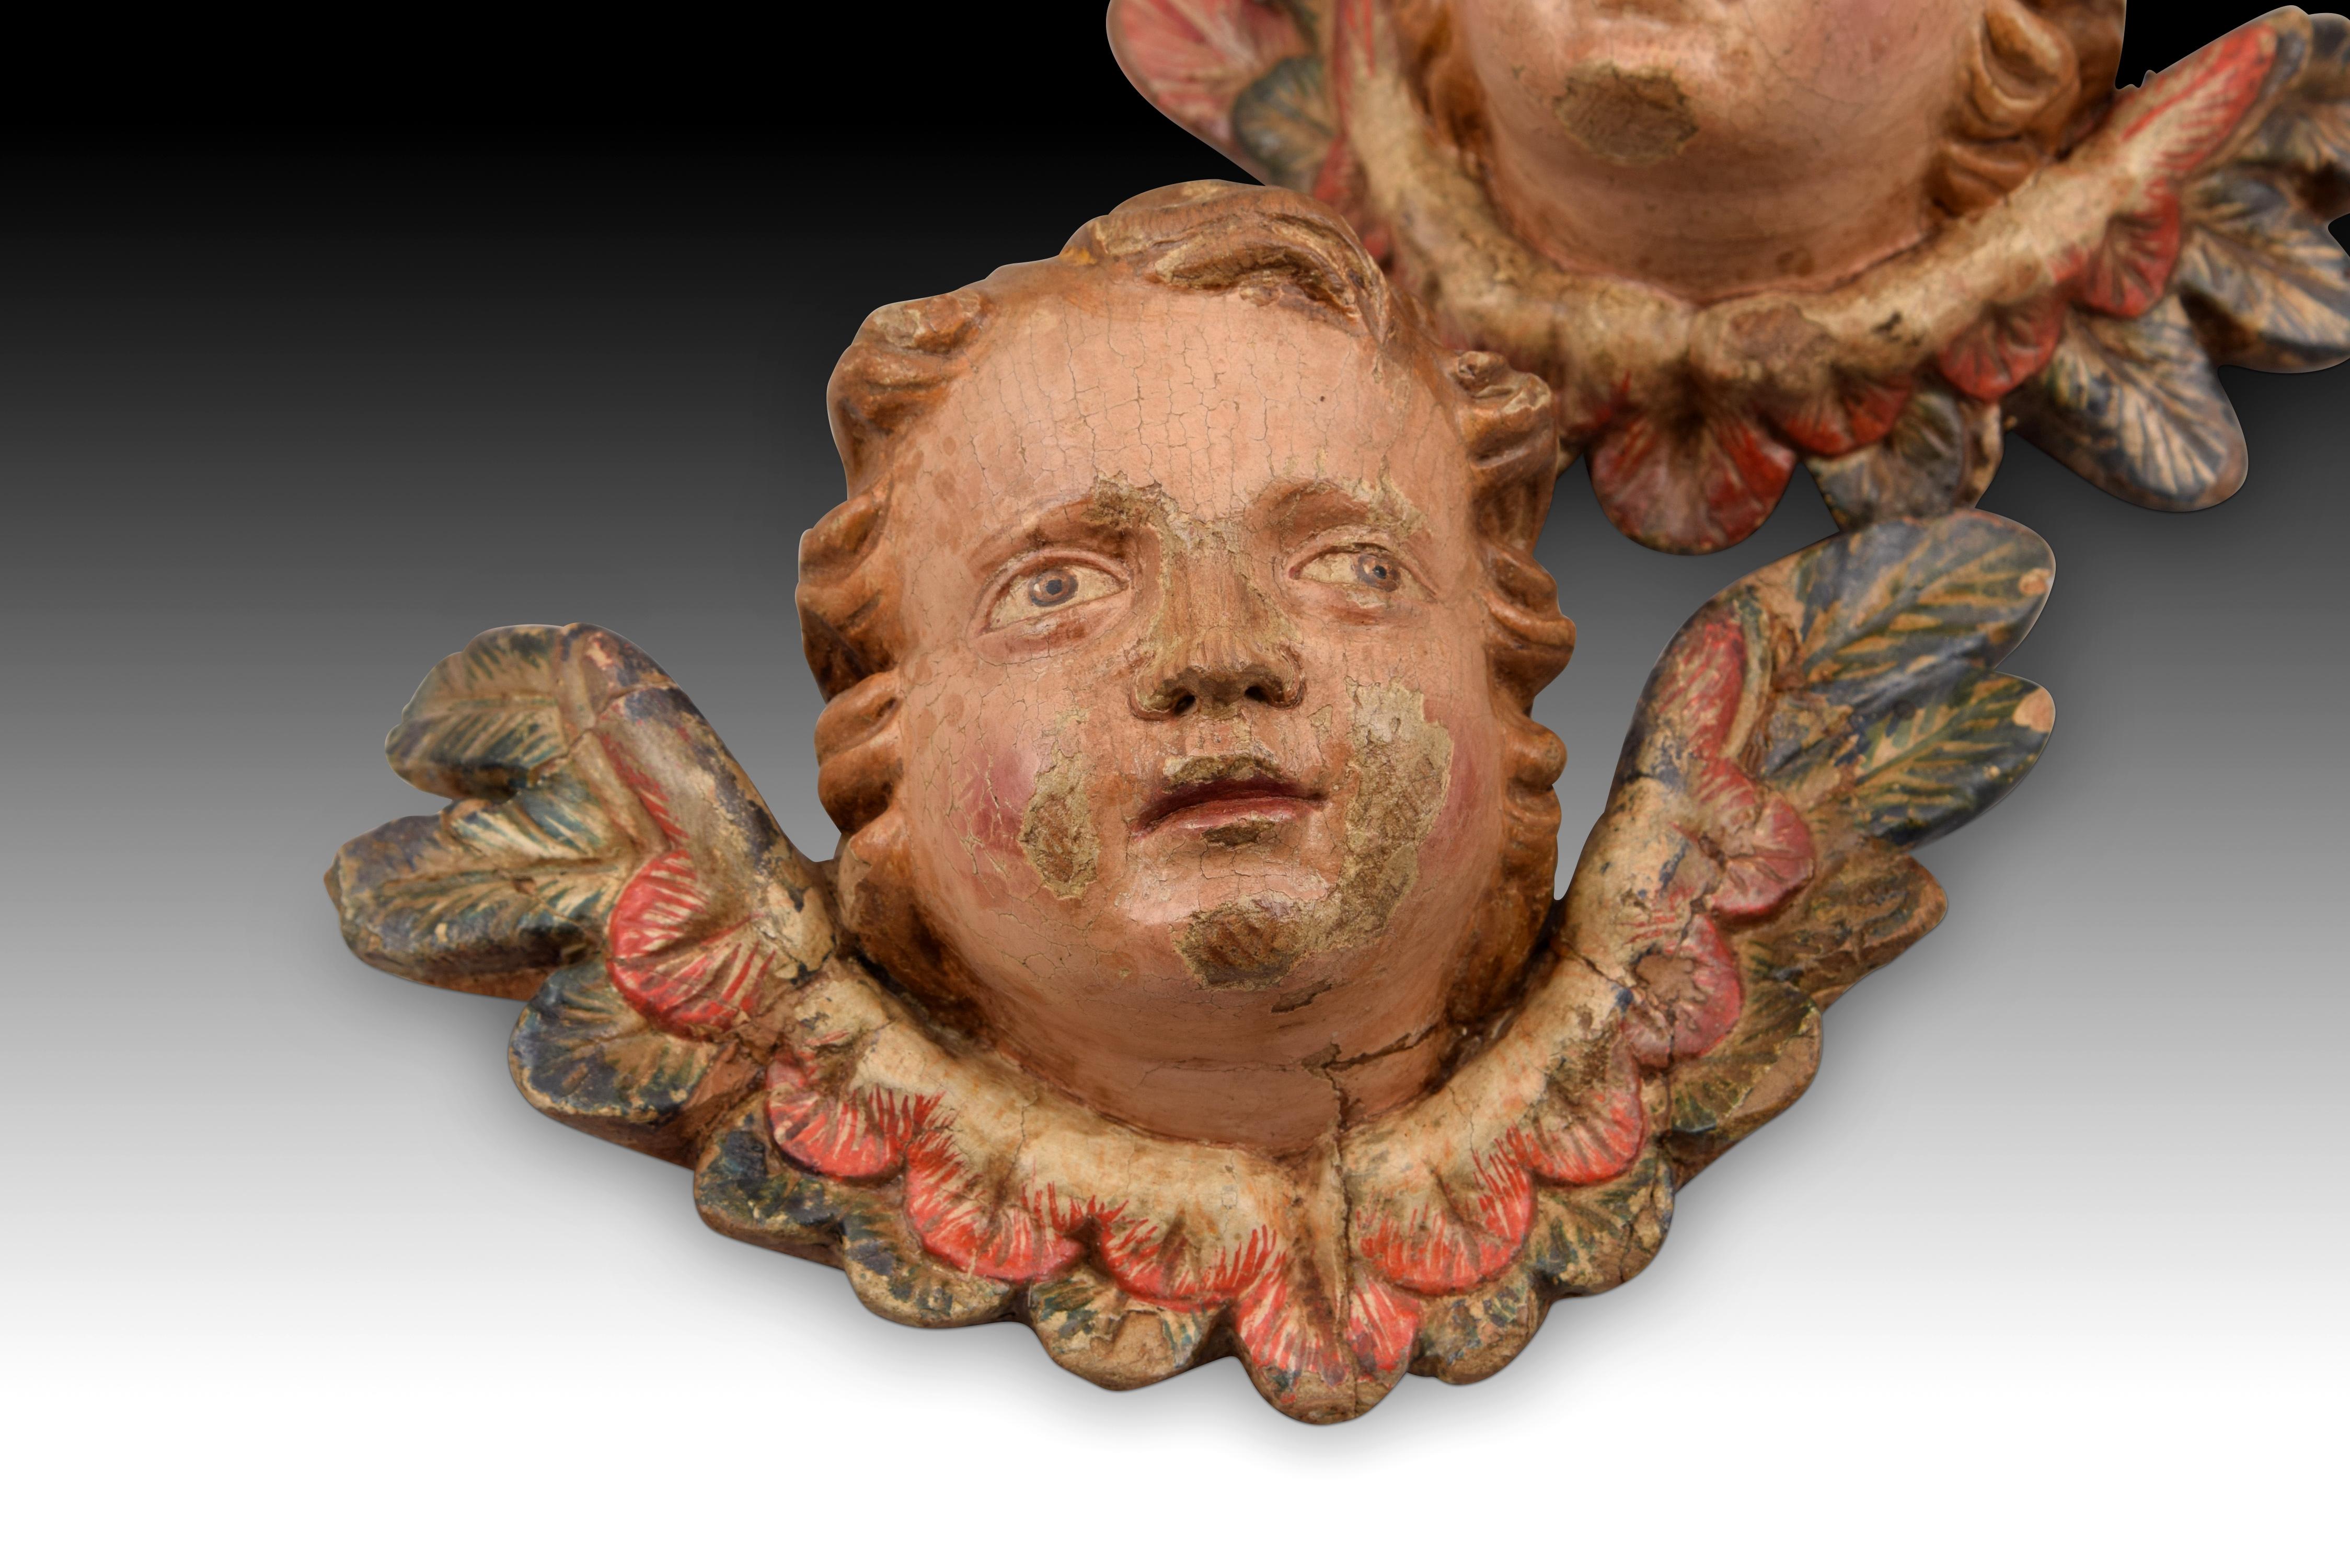 Pair of angel heads. Carved and polychrome wood. Spanish school, 18th century. 
Pair of children's heads, from which a pair of wings emerge in each case, made of carved and polychrome wood. This type of sculpture was common in the Spanish school